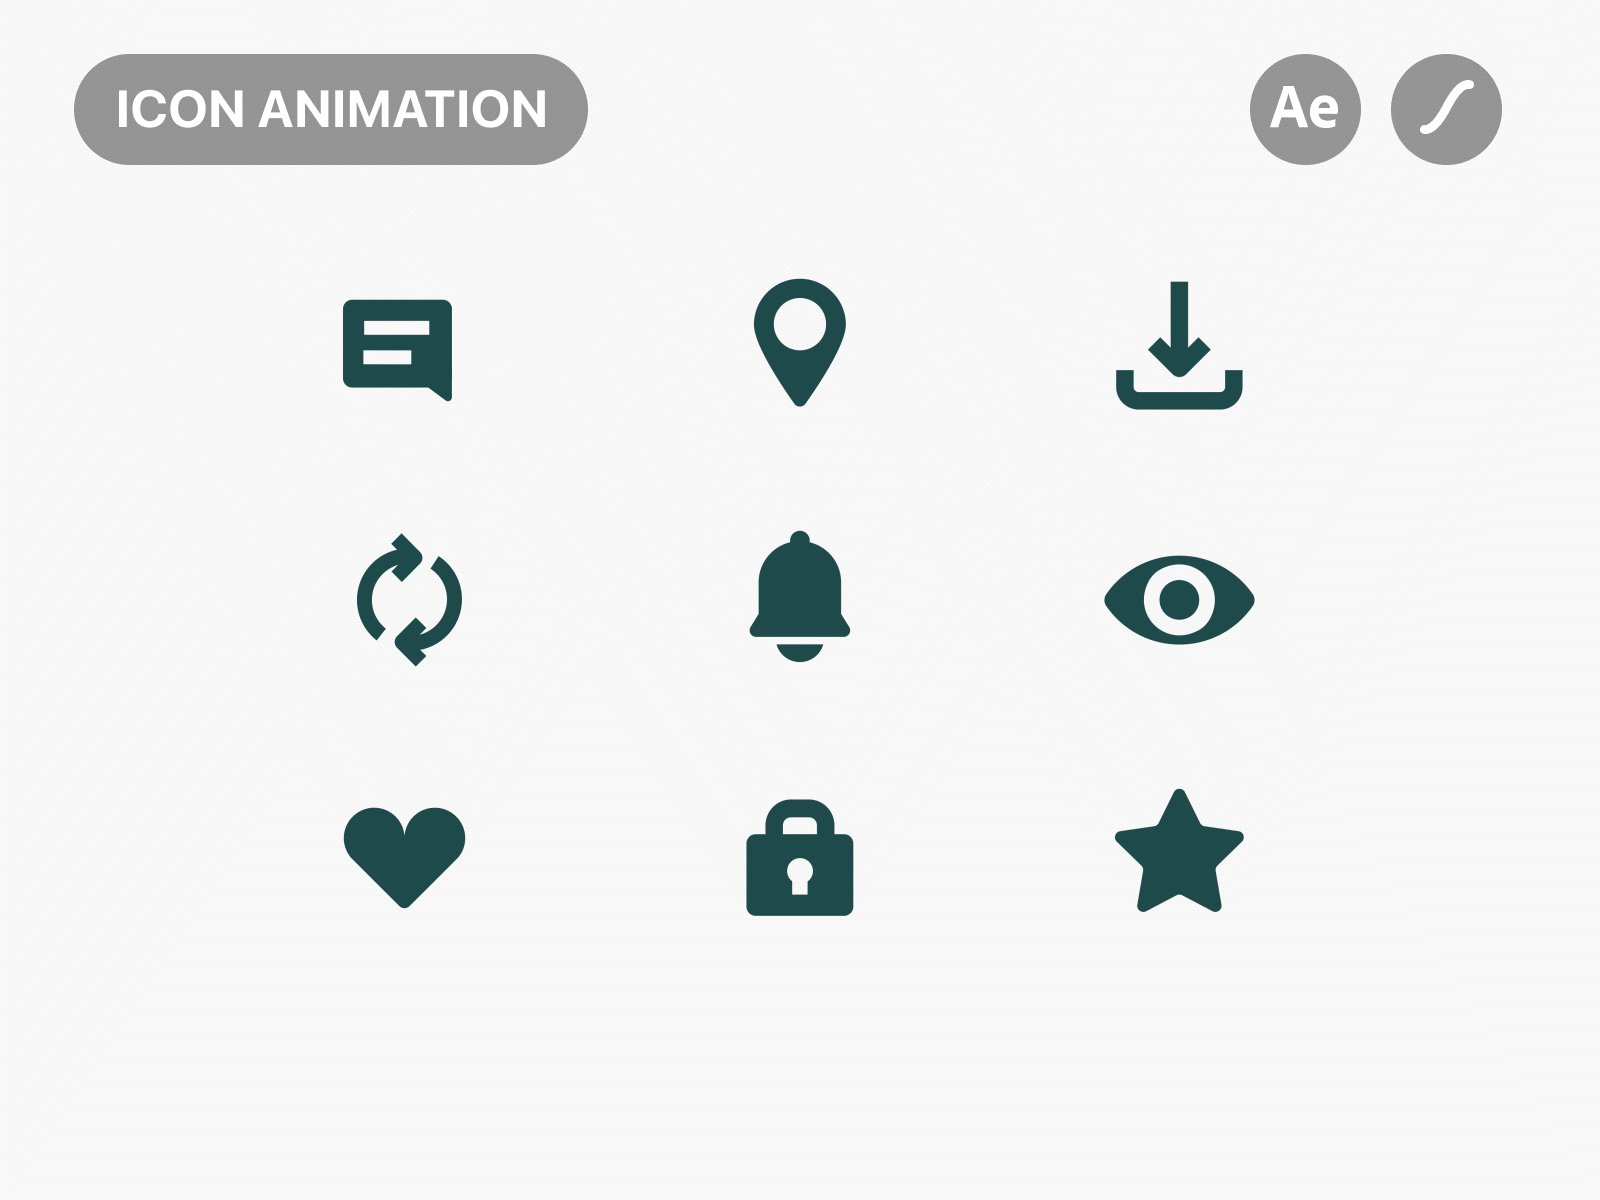 Lottie icons after effects animate app icons lottie mobile motion graphics